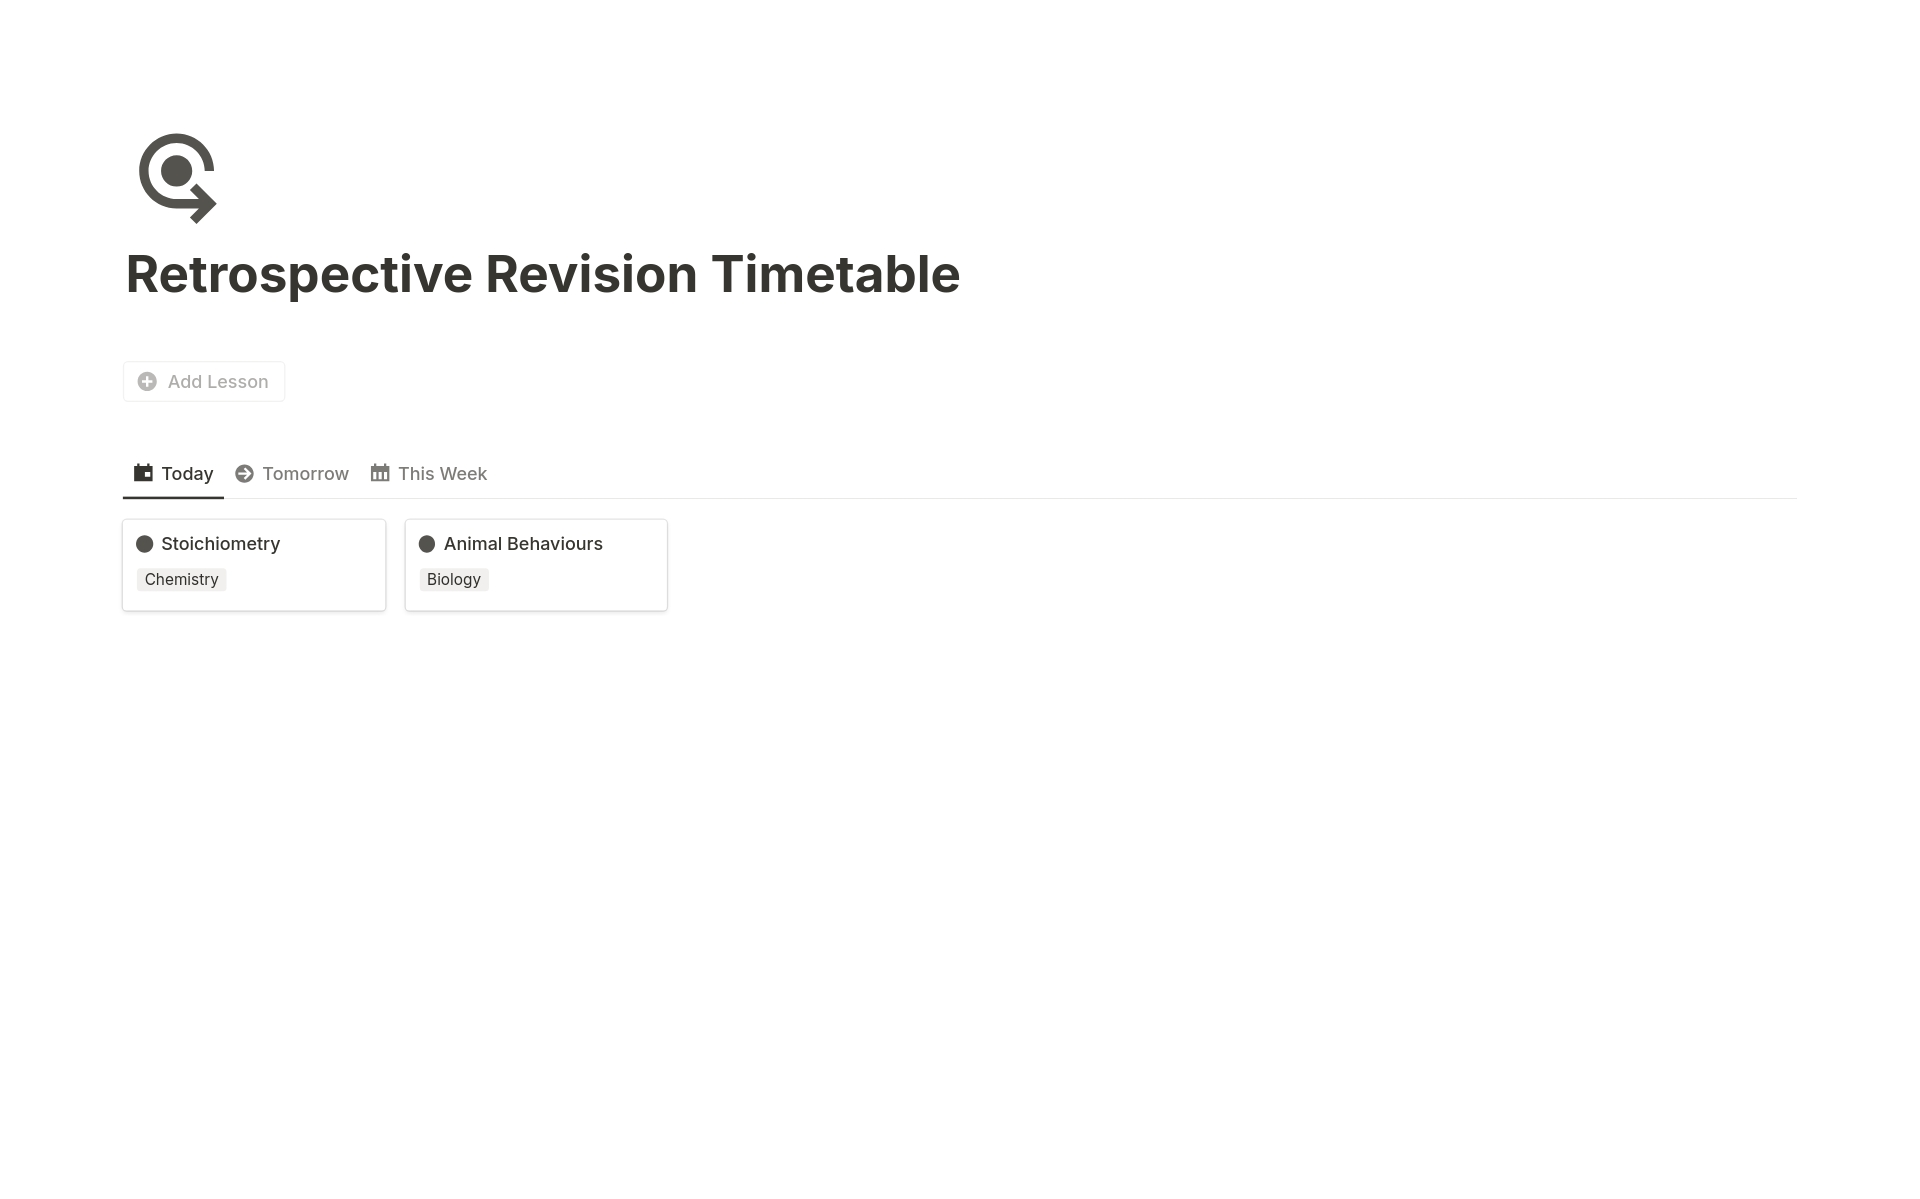 Keep your revision schedule in one place to be ready for exam season!